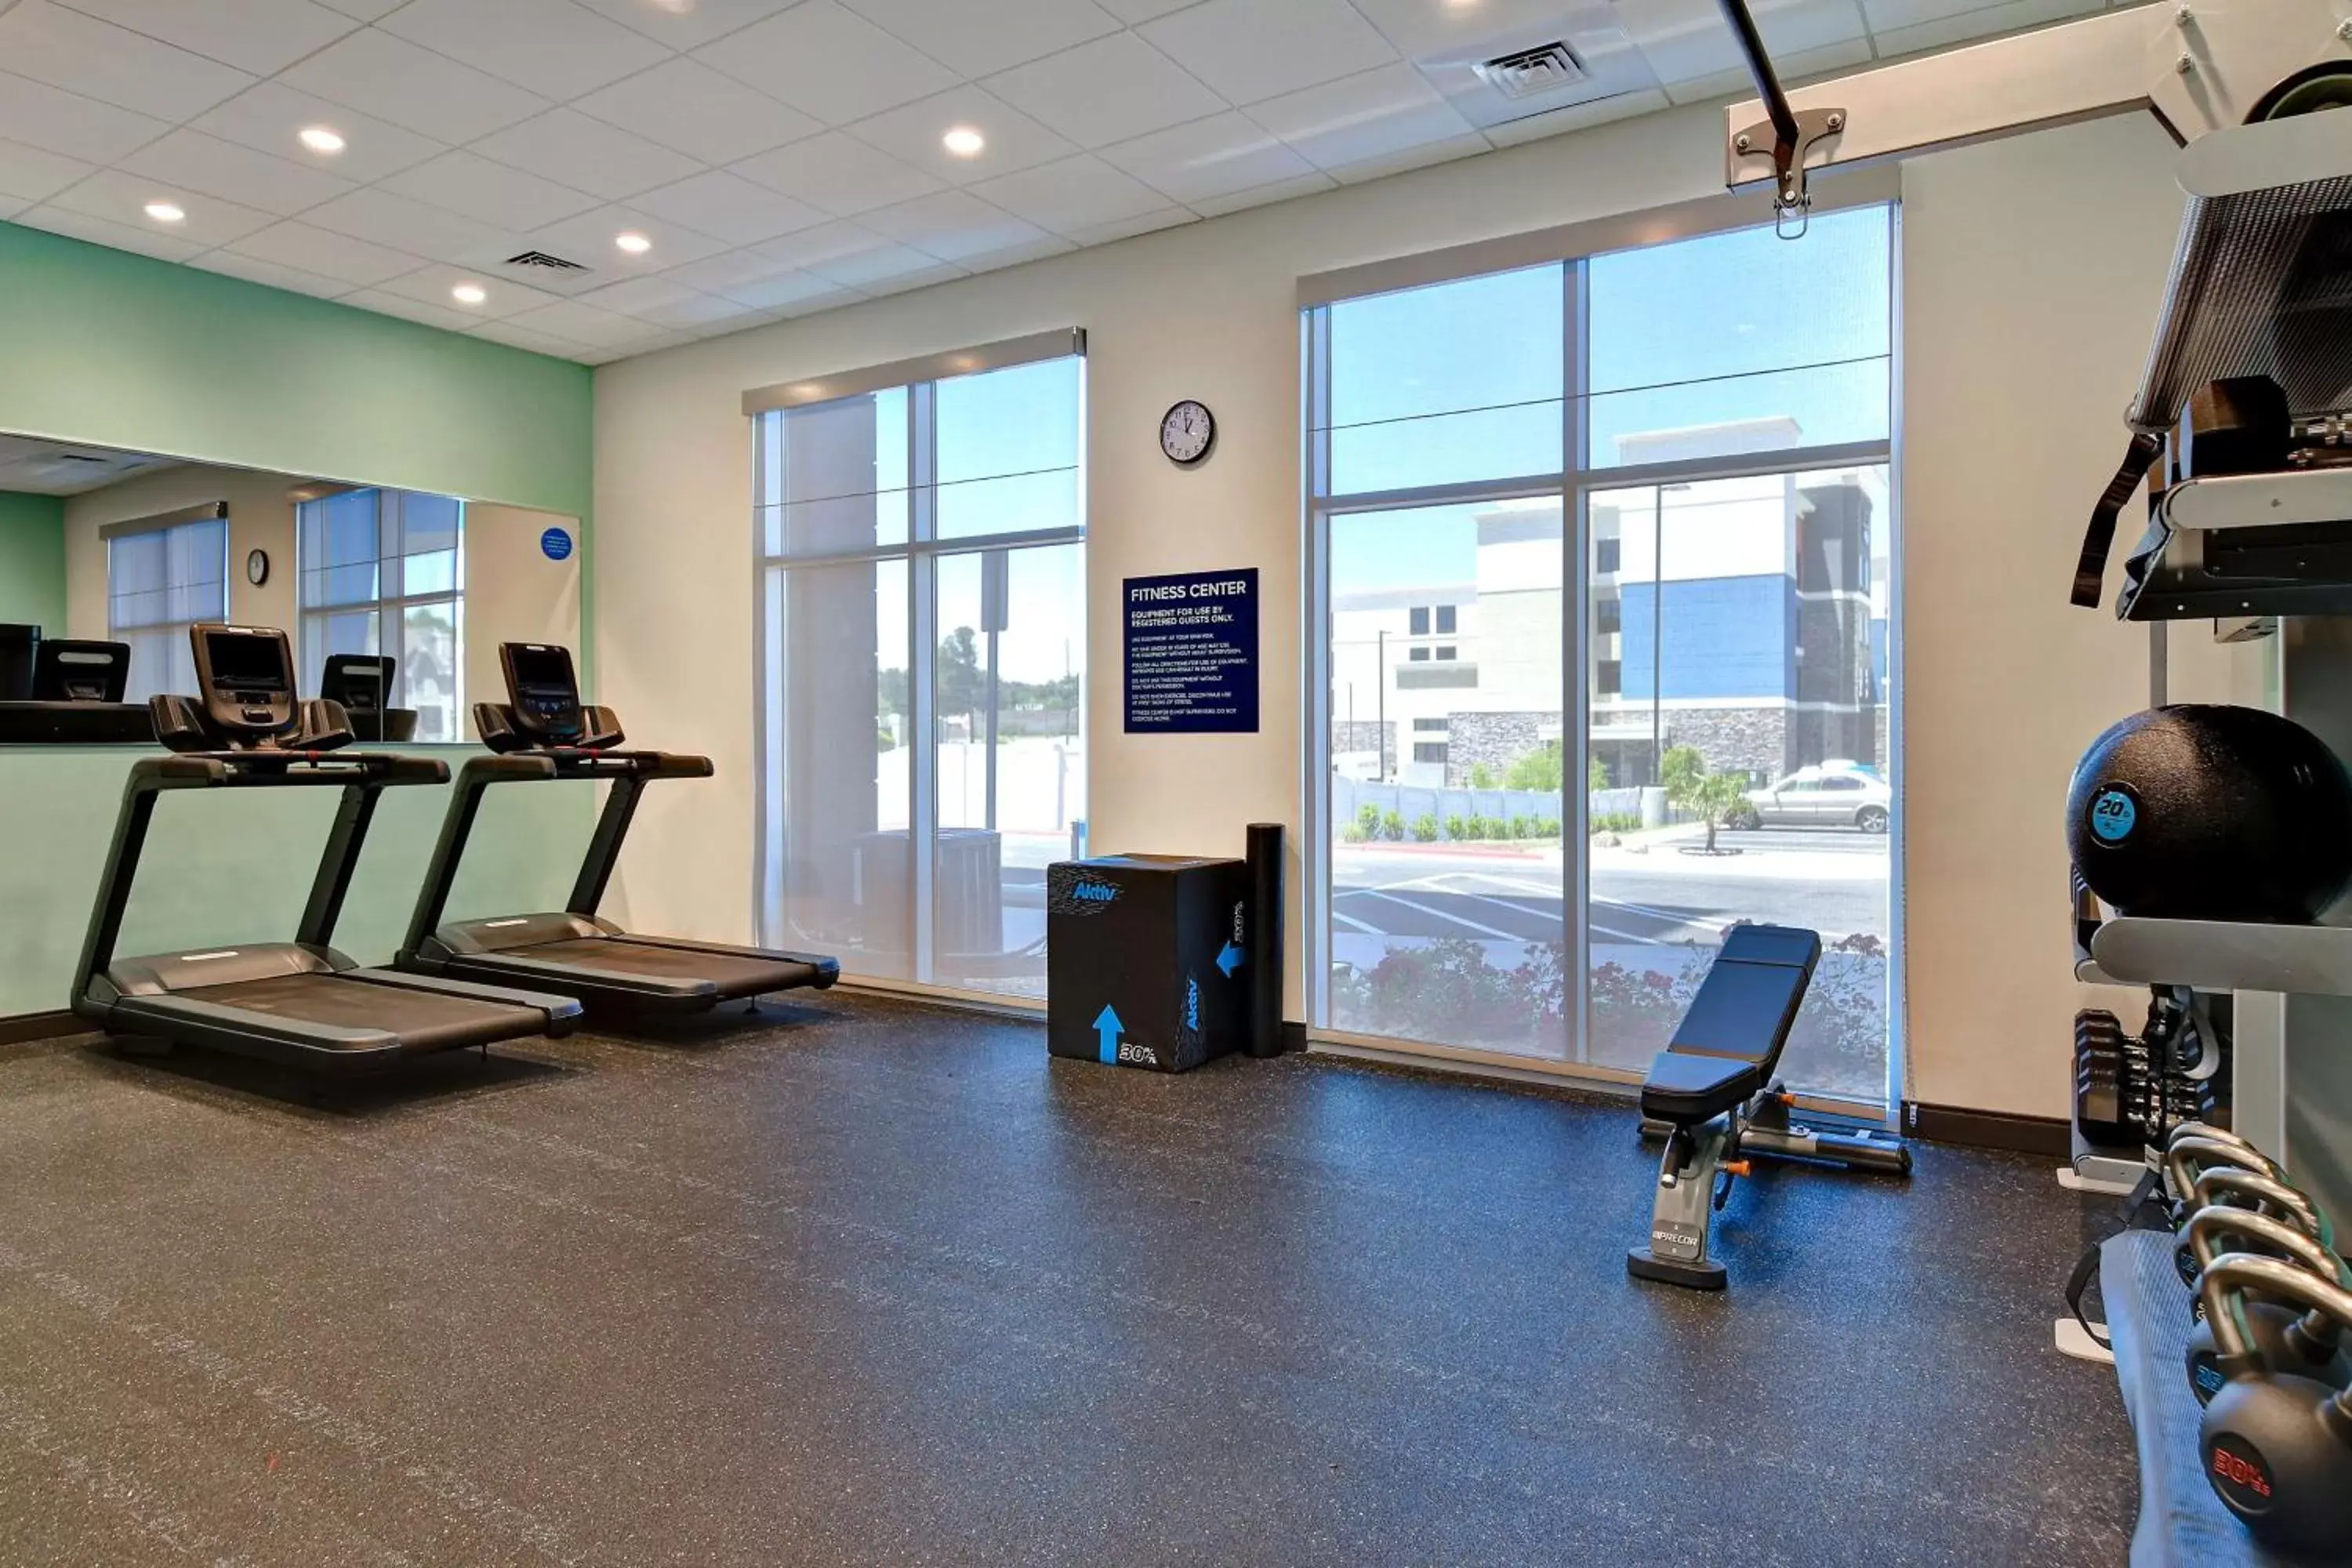 Fitness centre/facilities, Fitness Center/Facilities in Tru By Hilton Rocky Mount, Nc